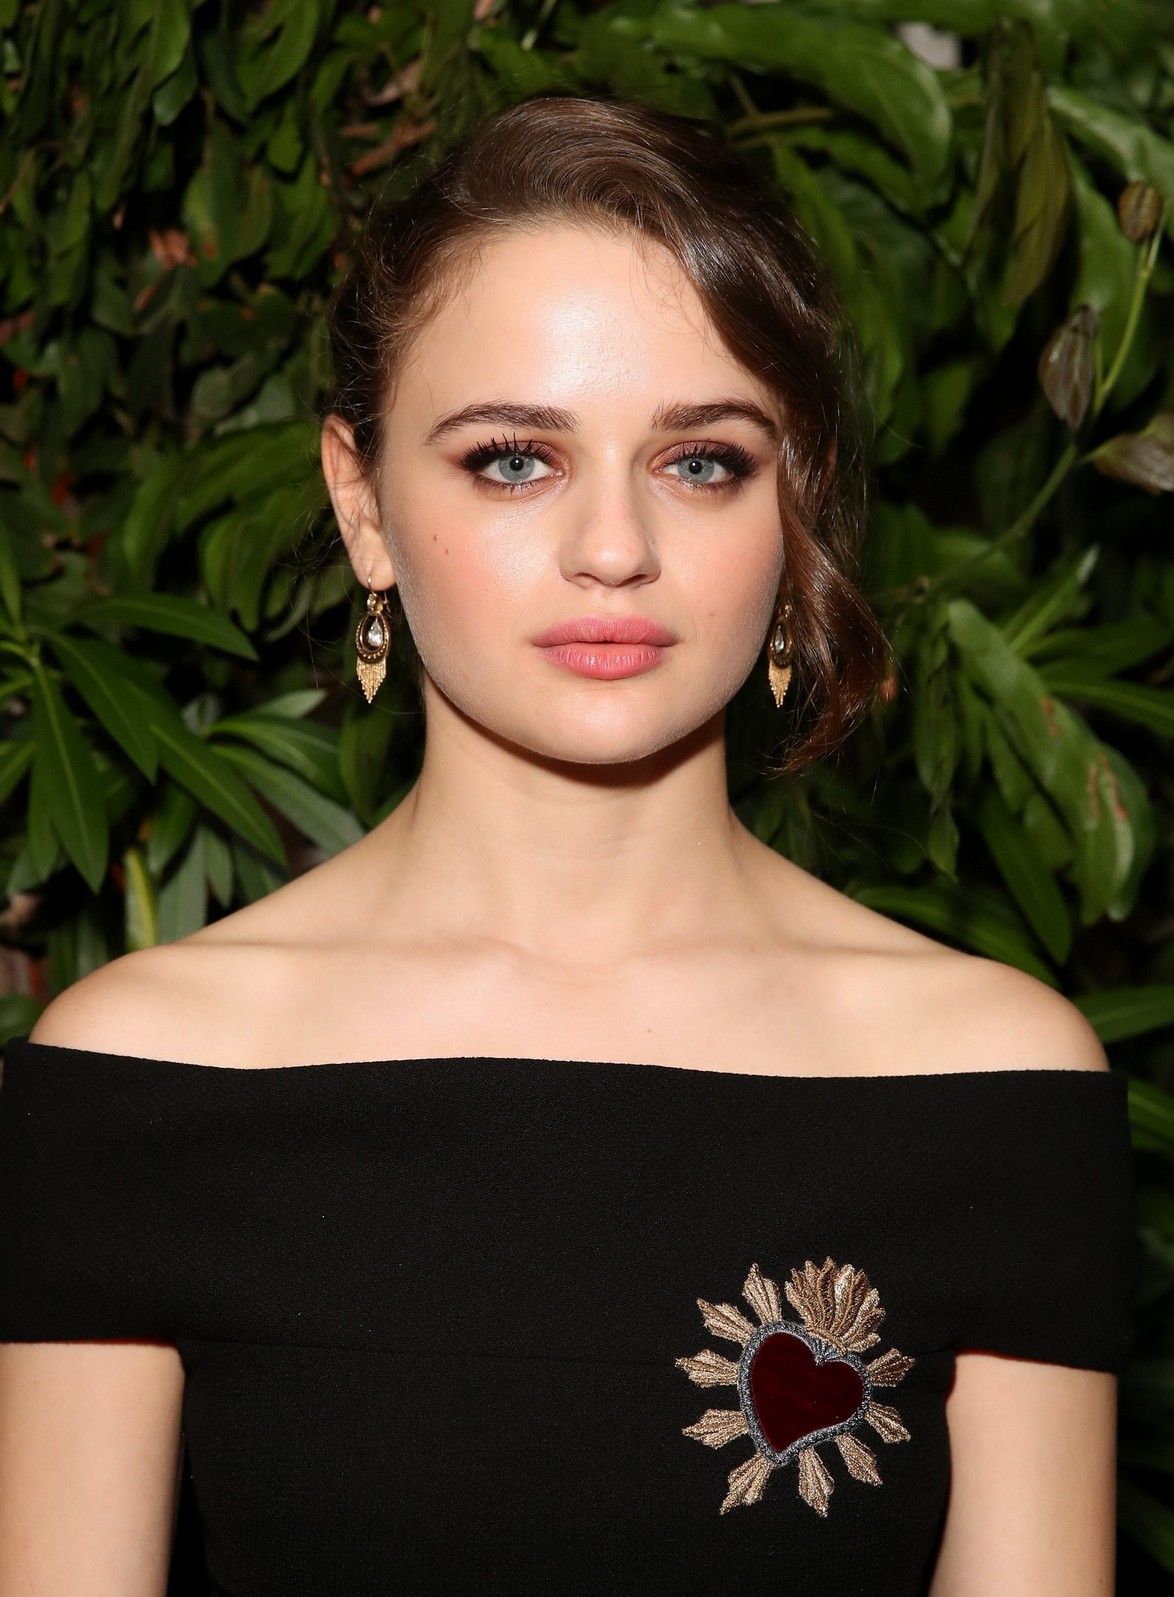 70+ Hot And Sexy Pictures Of Joey King Exposes Her Curvy Body 18